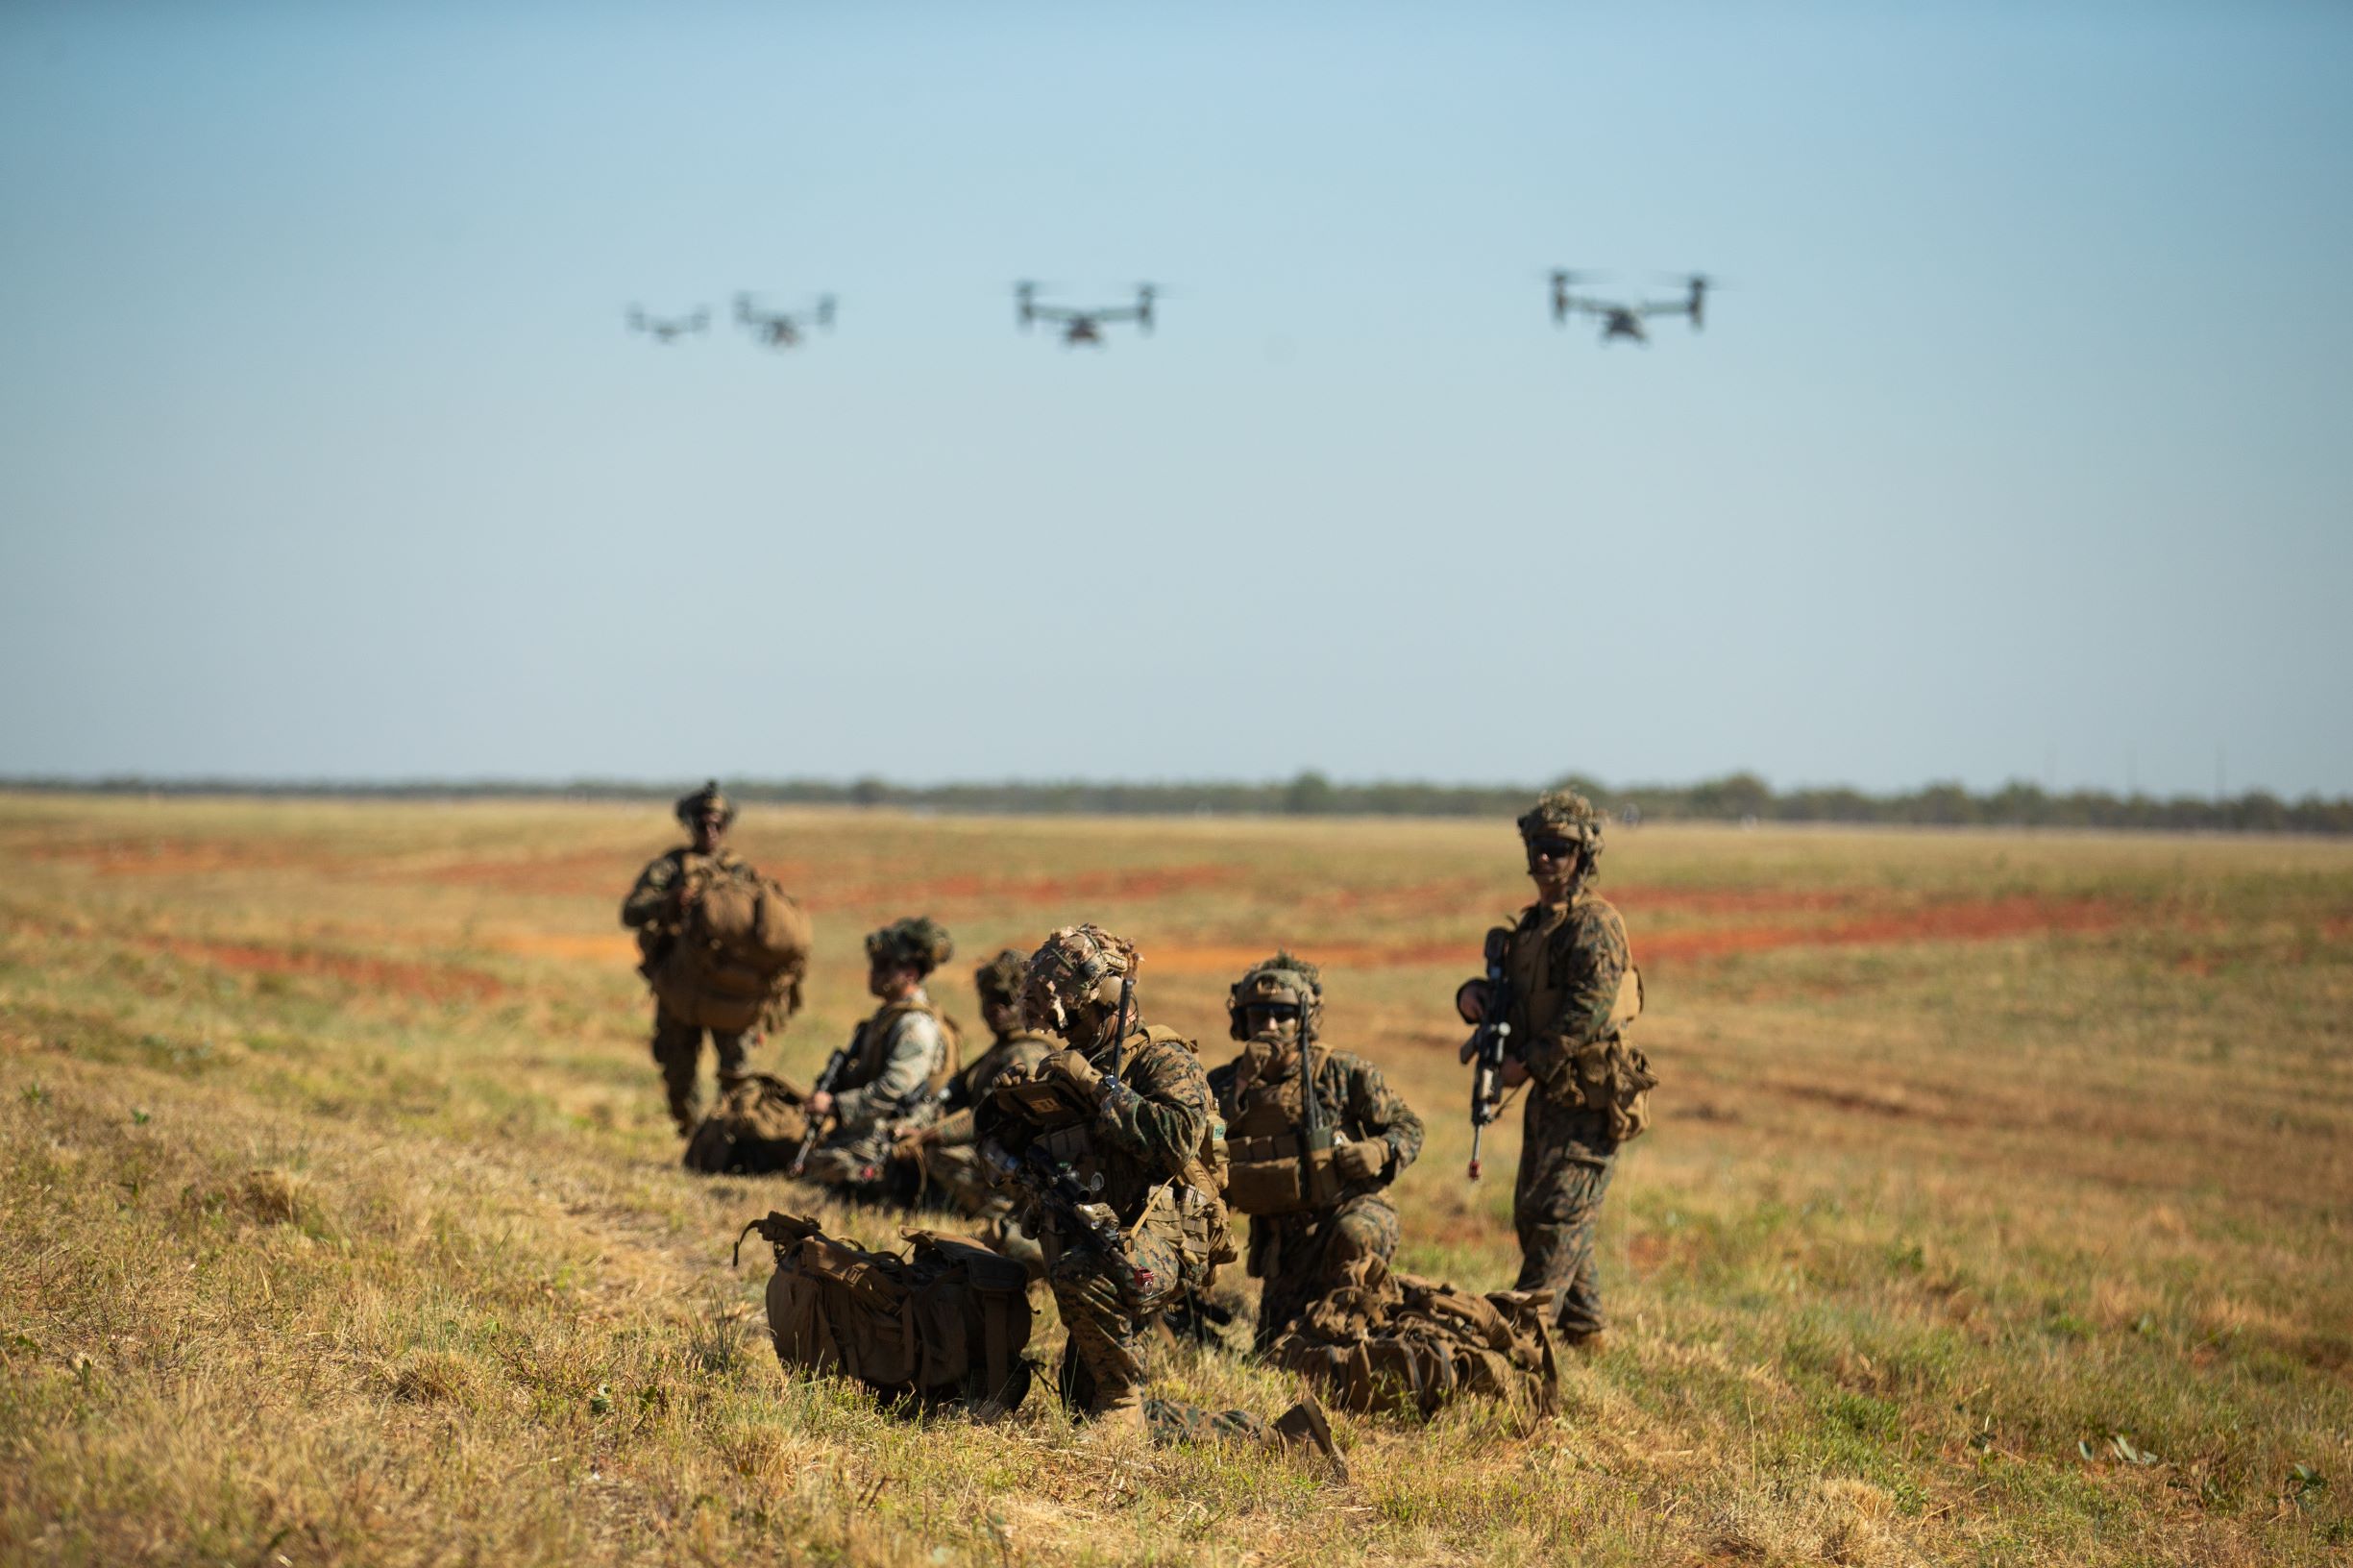 U.S. Marines with 3d Battalion, 7th Marine Regiment, Ground Combat Element, Marine Rotational Force-Darwin 22, establish defensive positions as MV-22 Ospreys approach for landing during an airfield seizure event as part of exercise Koolendong 22 at Royal Australian Air Force Base Curtin, WA, Australia, July 18, 2022. Exercise Koolendong 22 is a combined and joint force exercise focused on expeditionary advanced base operations conducted by U.S. Marines, U.S. Soldiers, U.S. Airmen, and Australian Defence Force personnel. (U.S. Marine Corps photo by Cpl. Cedar Barnes)